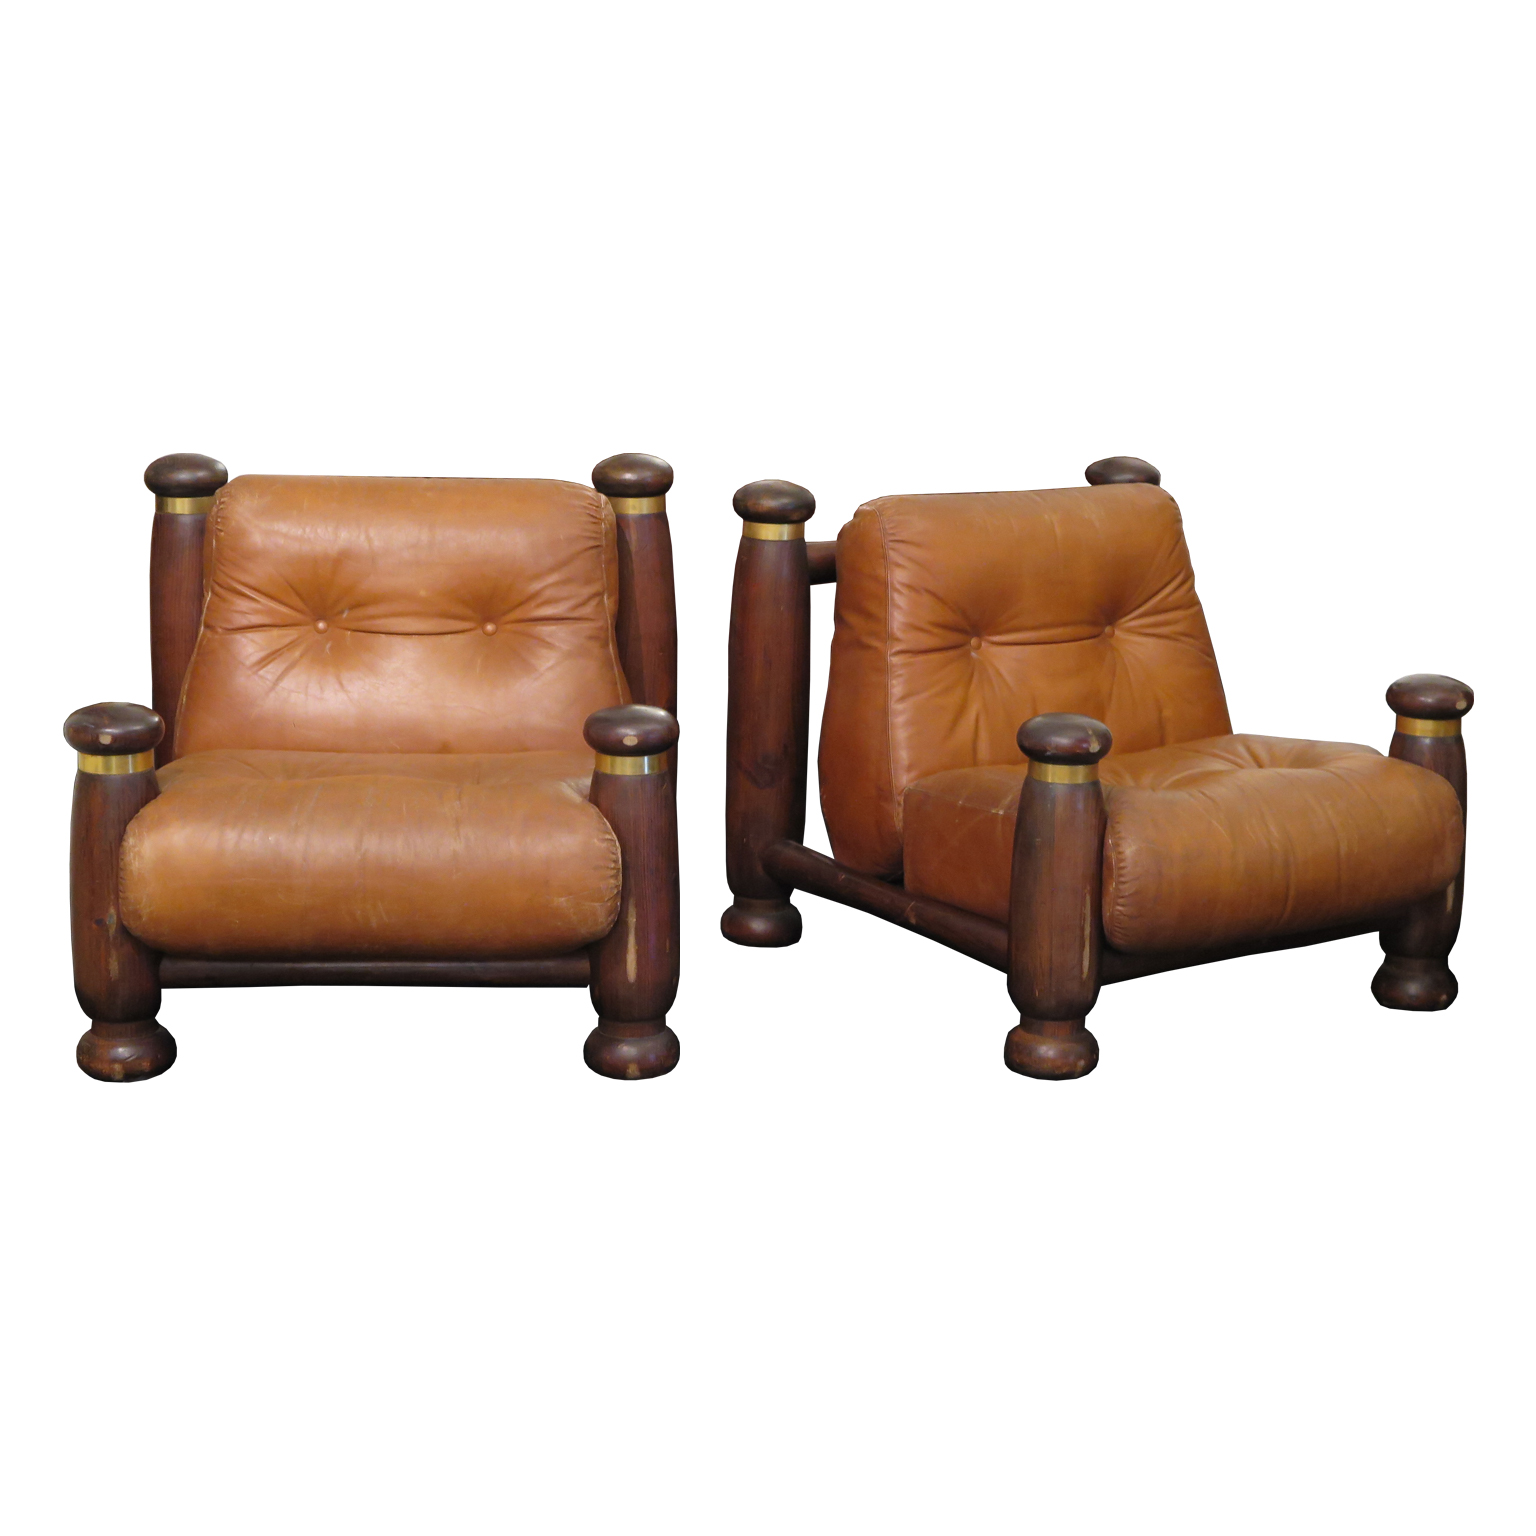 Pair of Italian Mid-Century Slipper chairs with Original Brown Leather Cushions and wood Frame